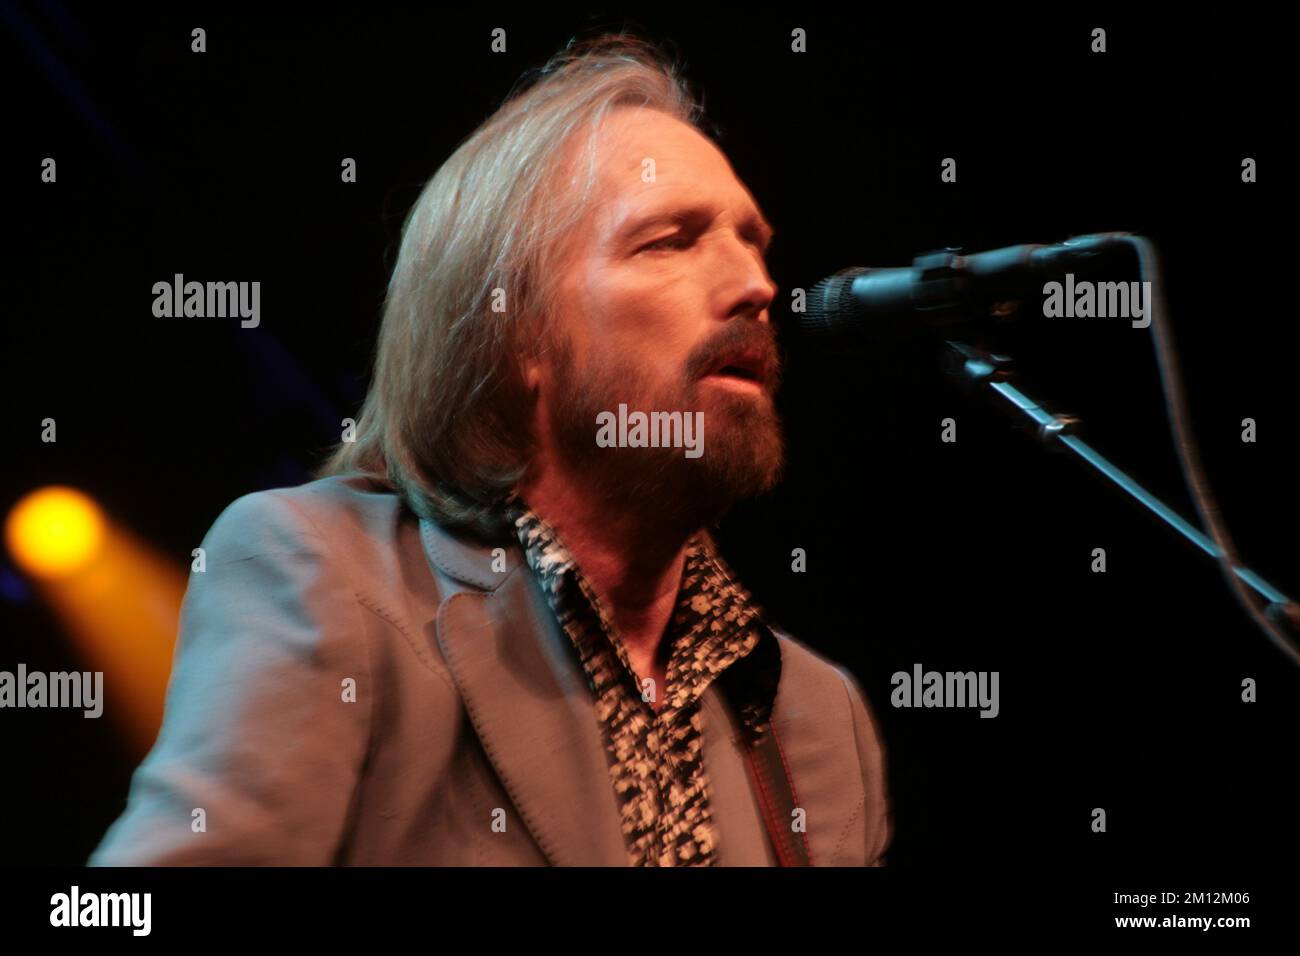 The Bonnaroo Music and Arts Festival - Tom Petty and the Heartbreakers in concert Stock Photo